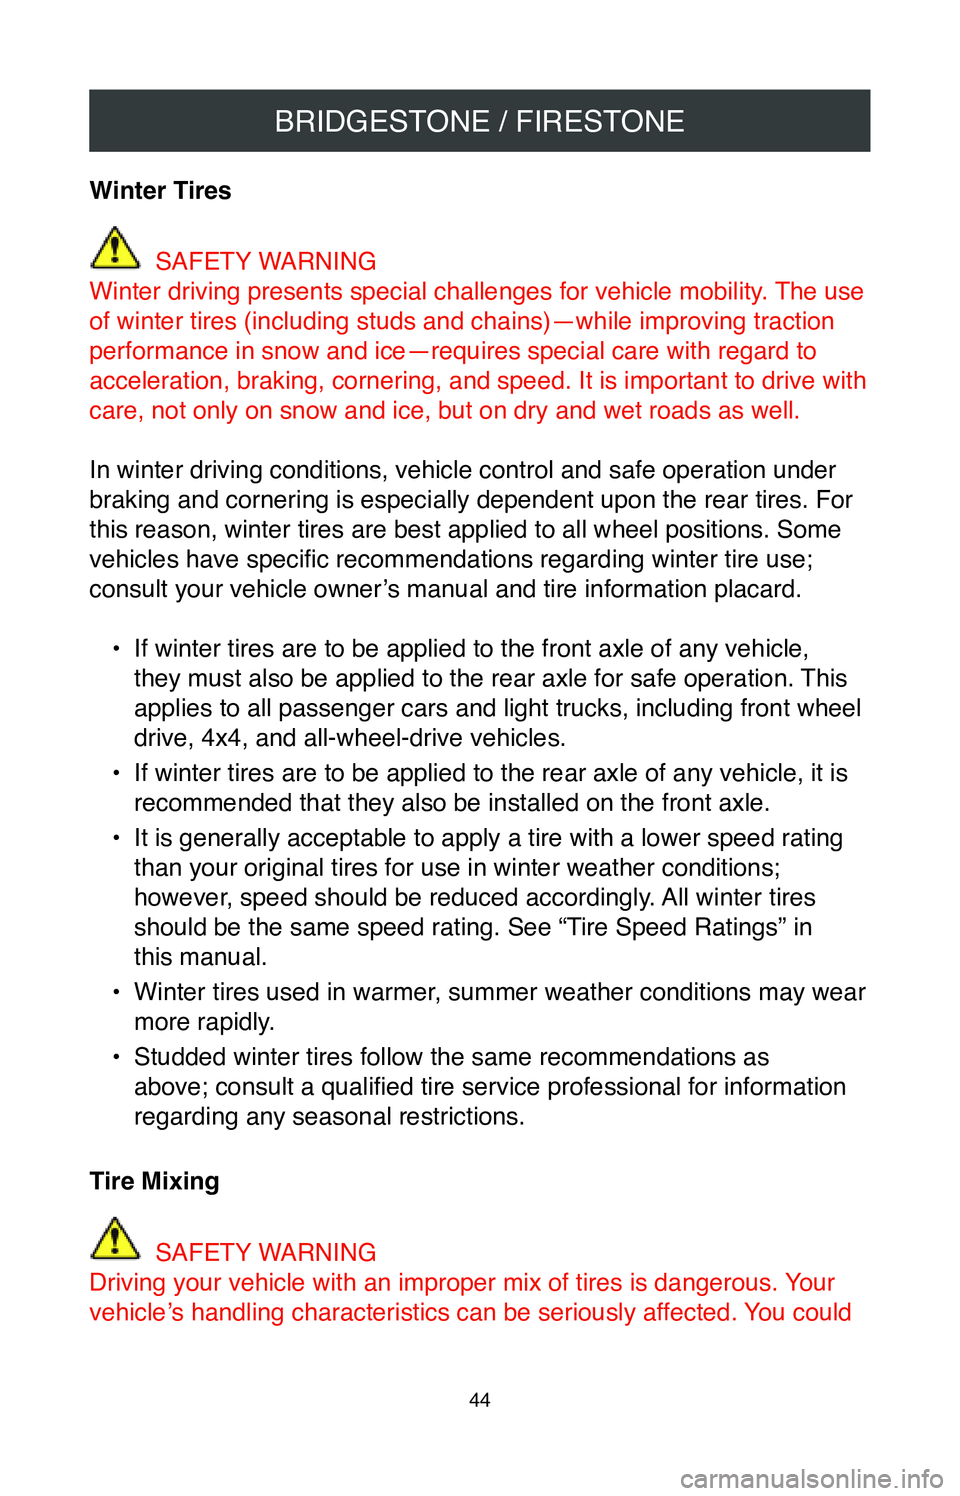 TOYOTA RAV4 2020  Warranties & Maintenance Guides (in English) BRIDGESTONE / FIRESTONE
44
Winter Tires 
 SAFETY WARNING
Winter driving presents special challenges for vehicle mobility. The use 
of winter tires (including studs and chains)—while improving tracti